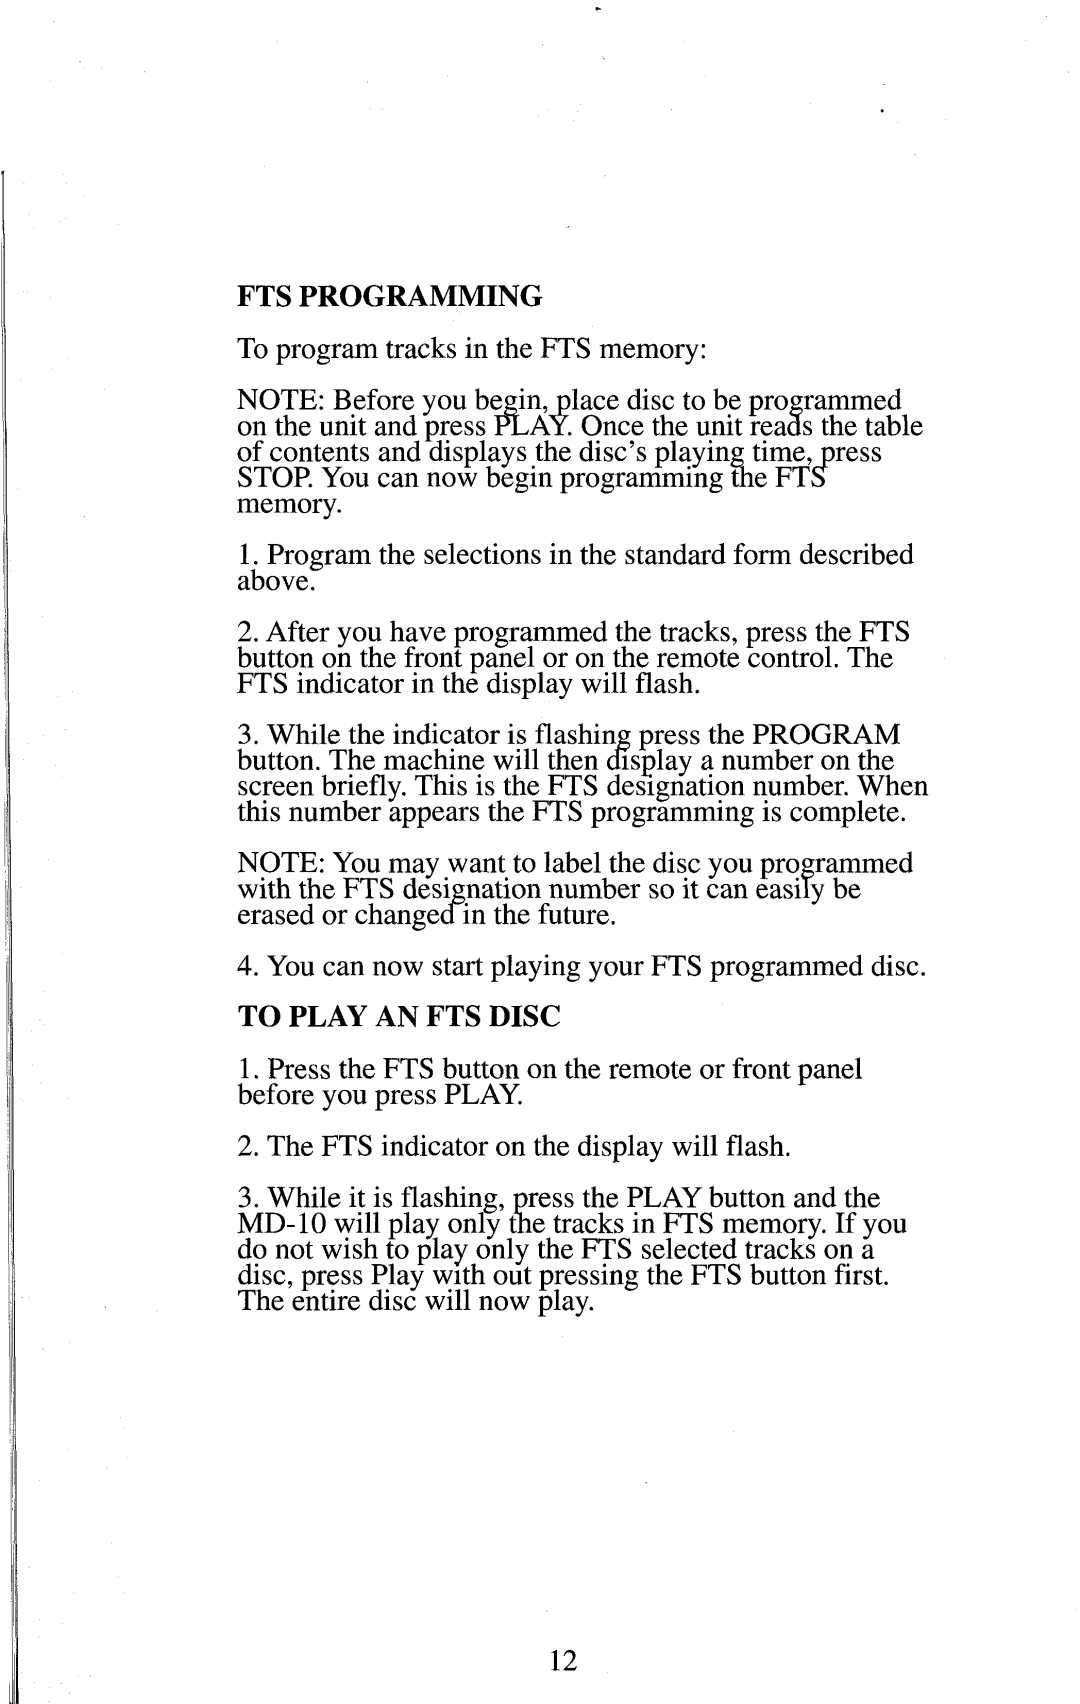 Krell Industries MD-20 manual Fts Programming, To Play An Fts Disc 